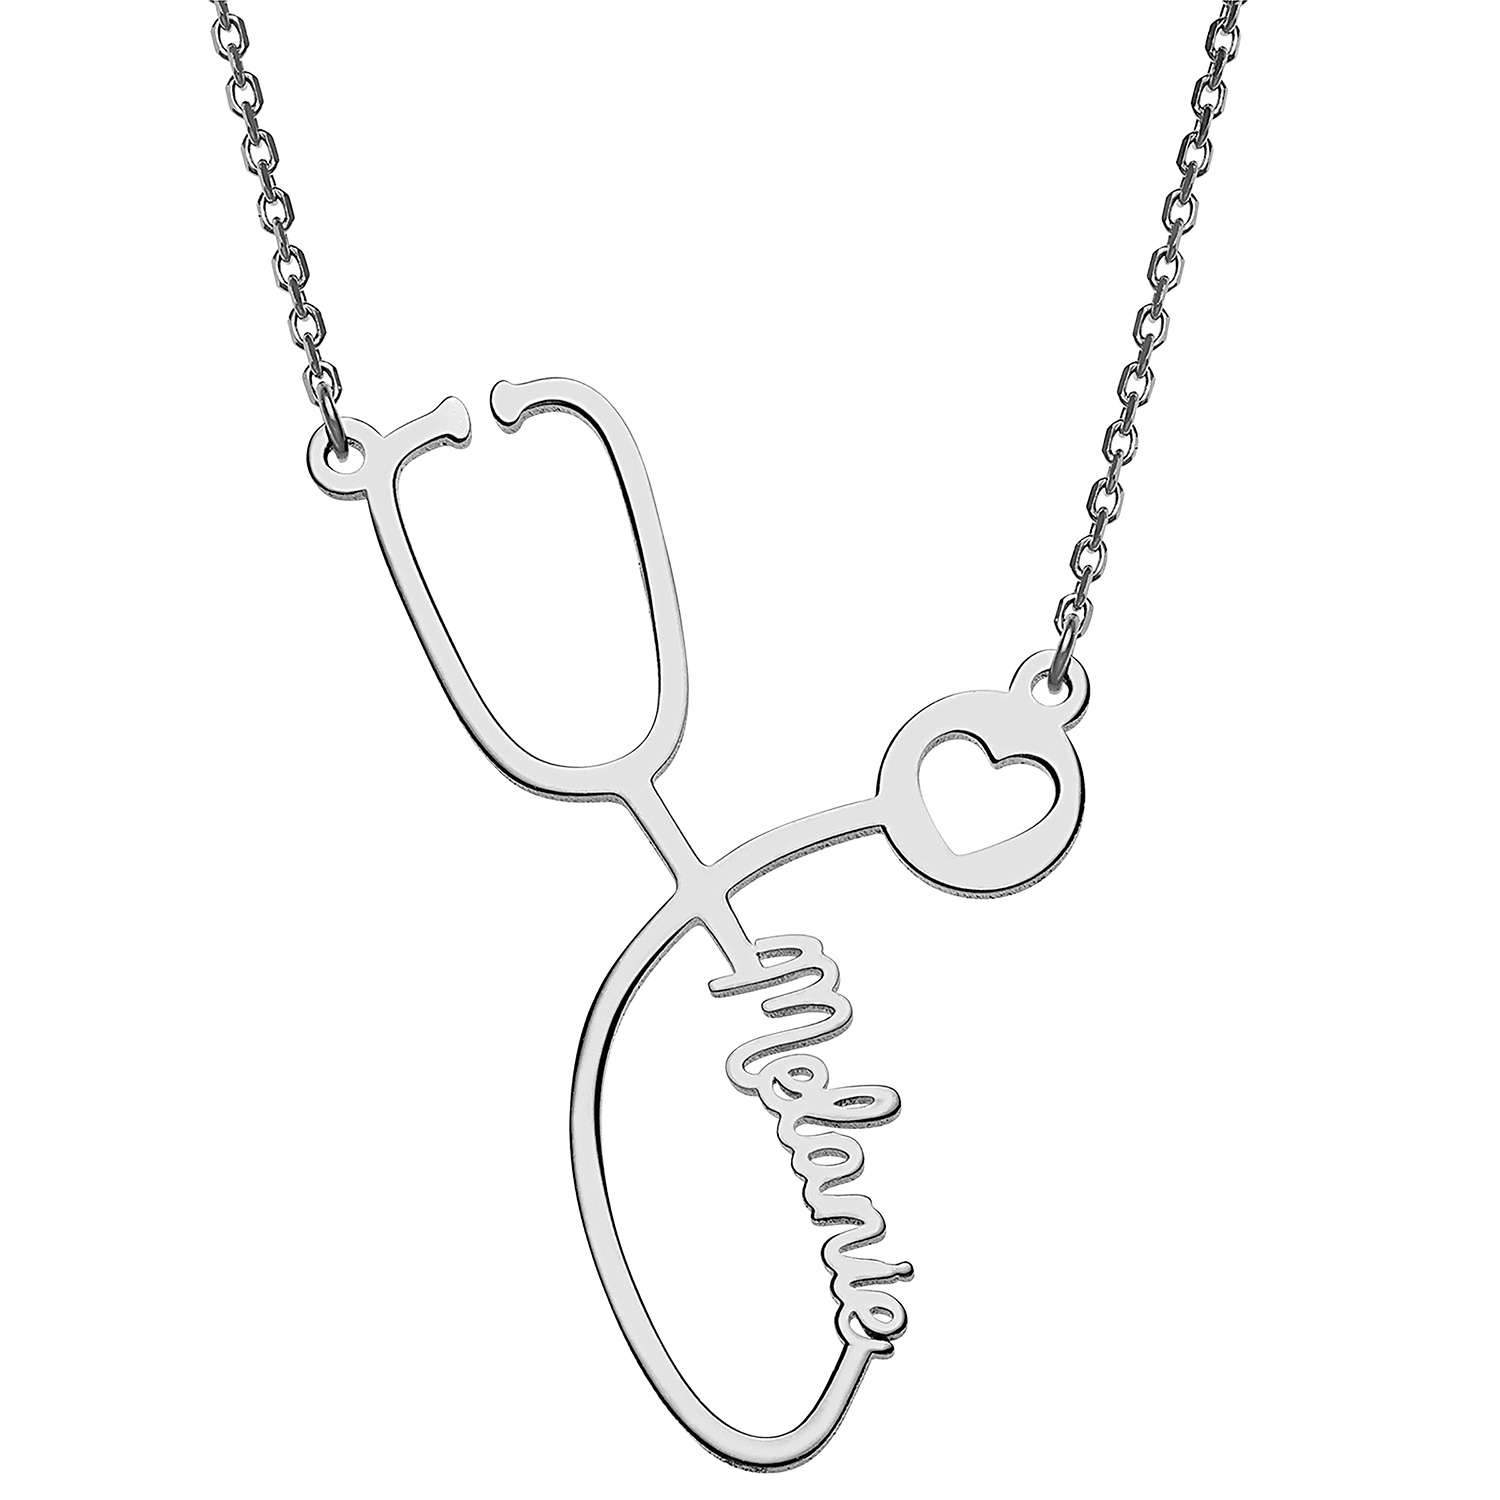 Personalized Stethoscope Necklace | Shop.PBS.org